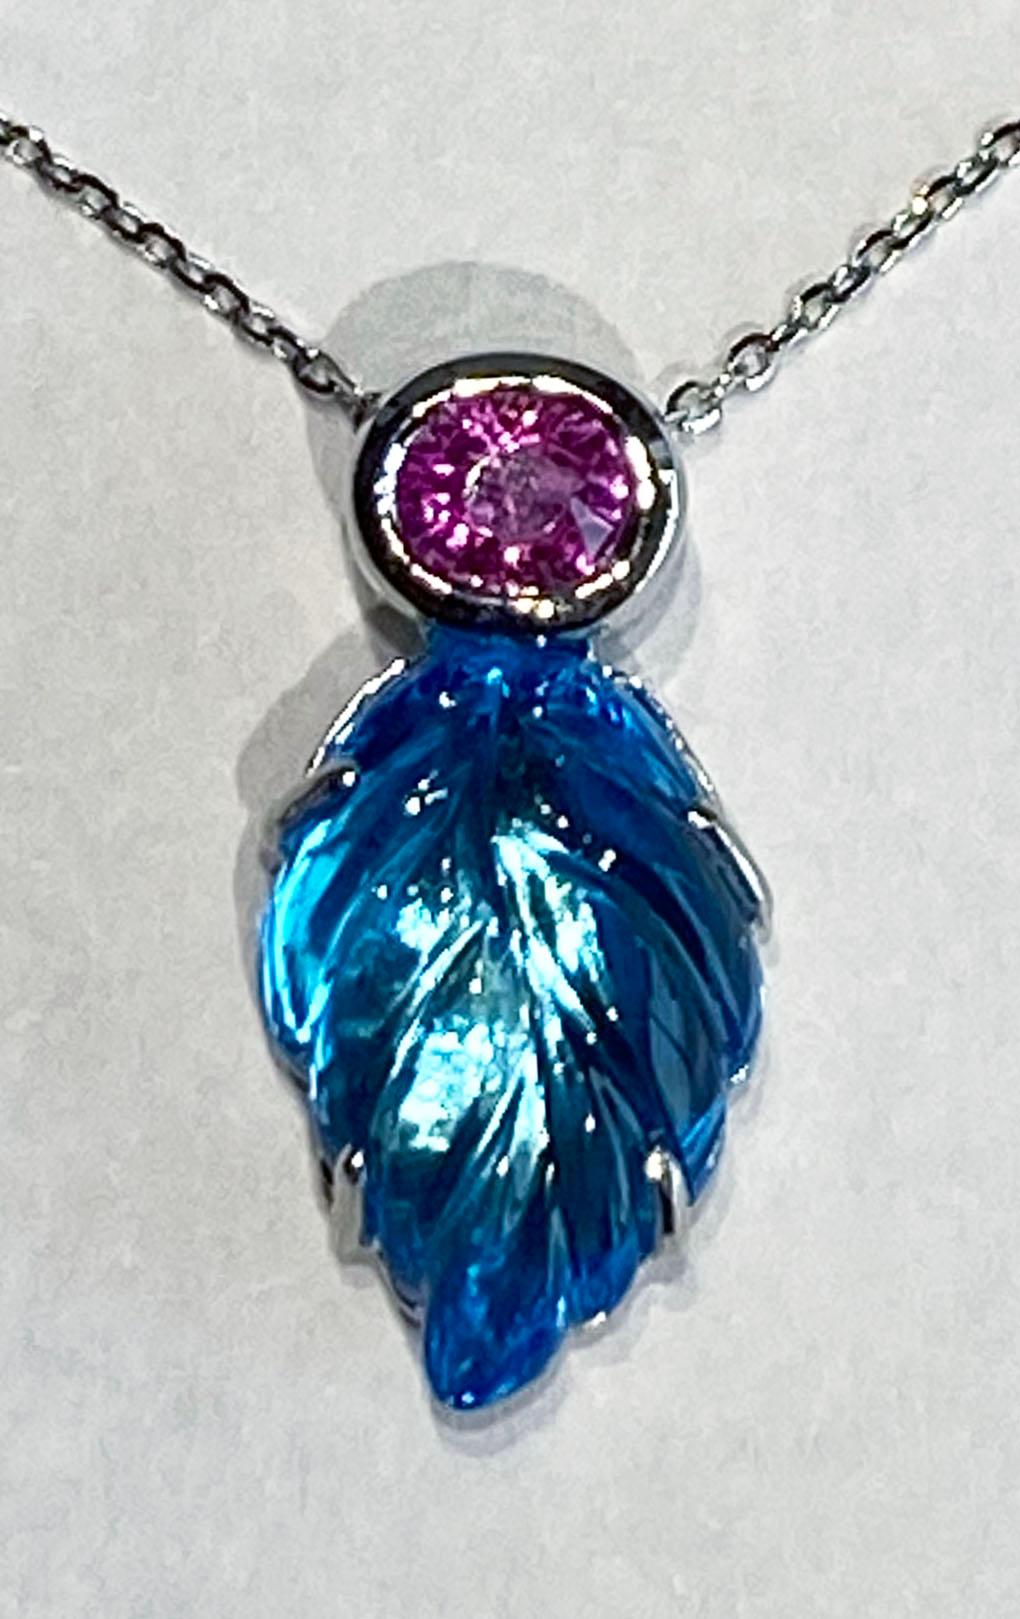 A Carved Topaz Pendant accented with Pink Sapphire set in 14kt White Gold. This 4.95 carat Topaz is carved as a leaf. The chain is an 18kt white gold chain that can adjust to 16